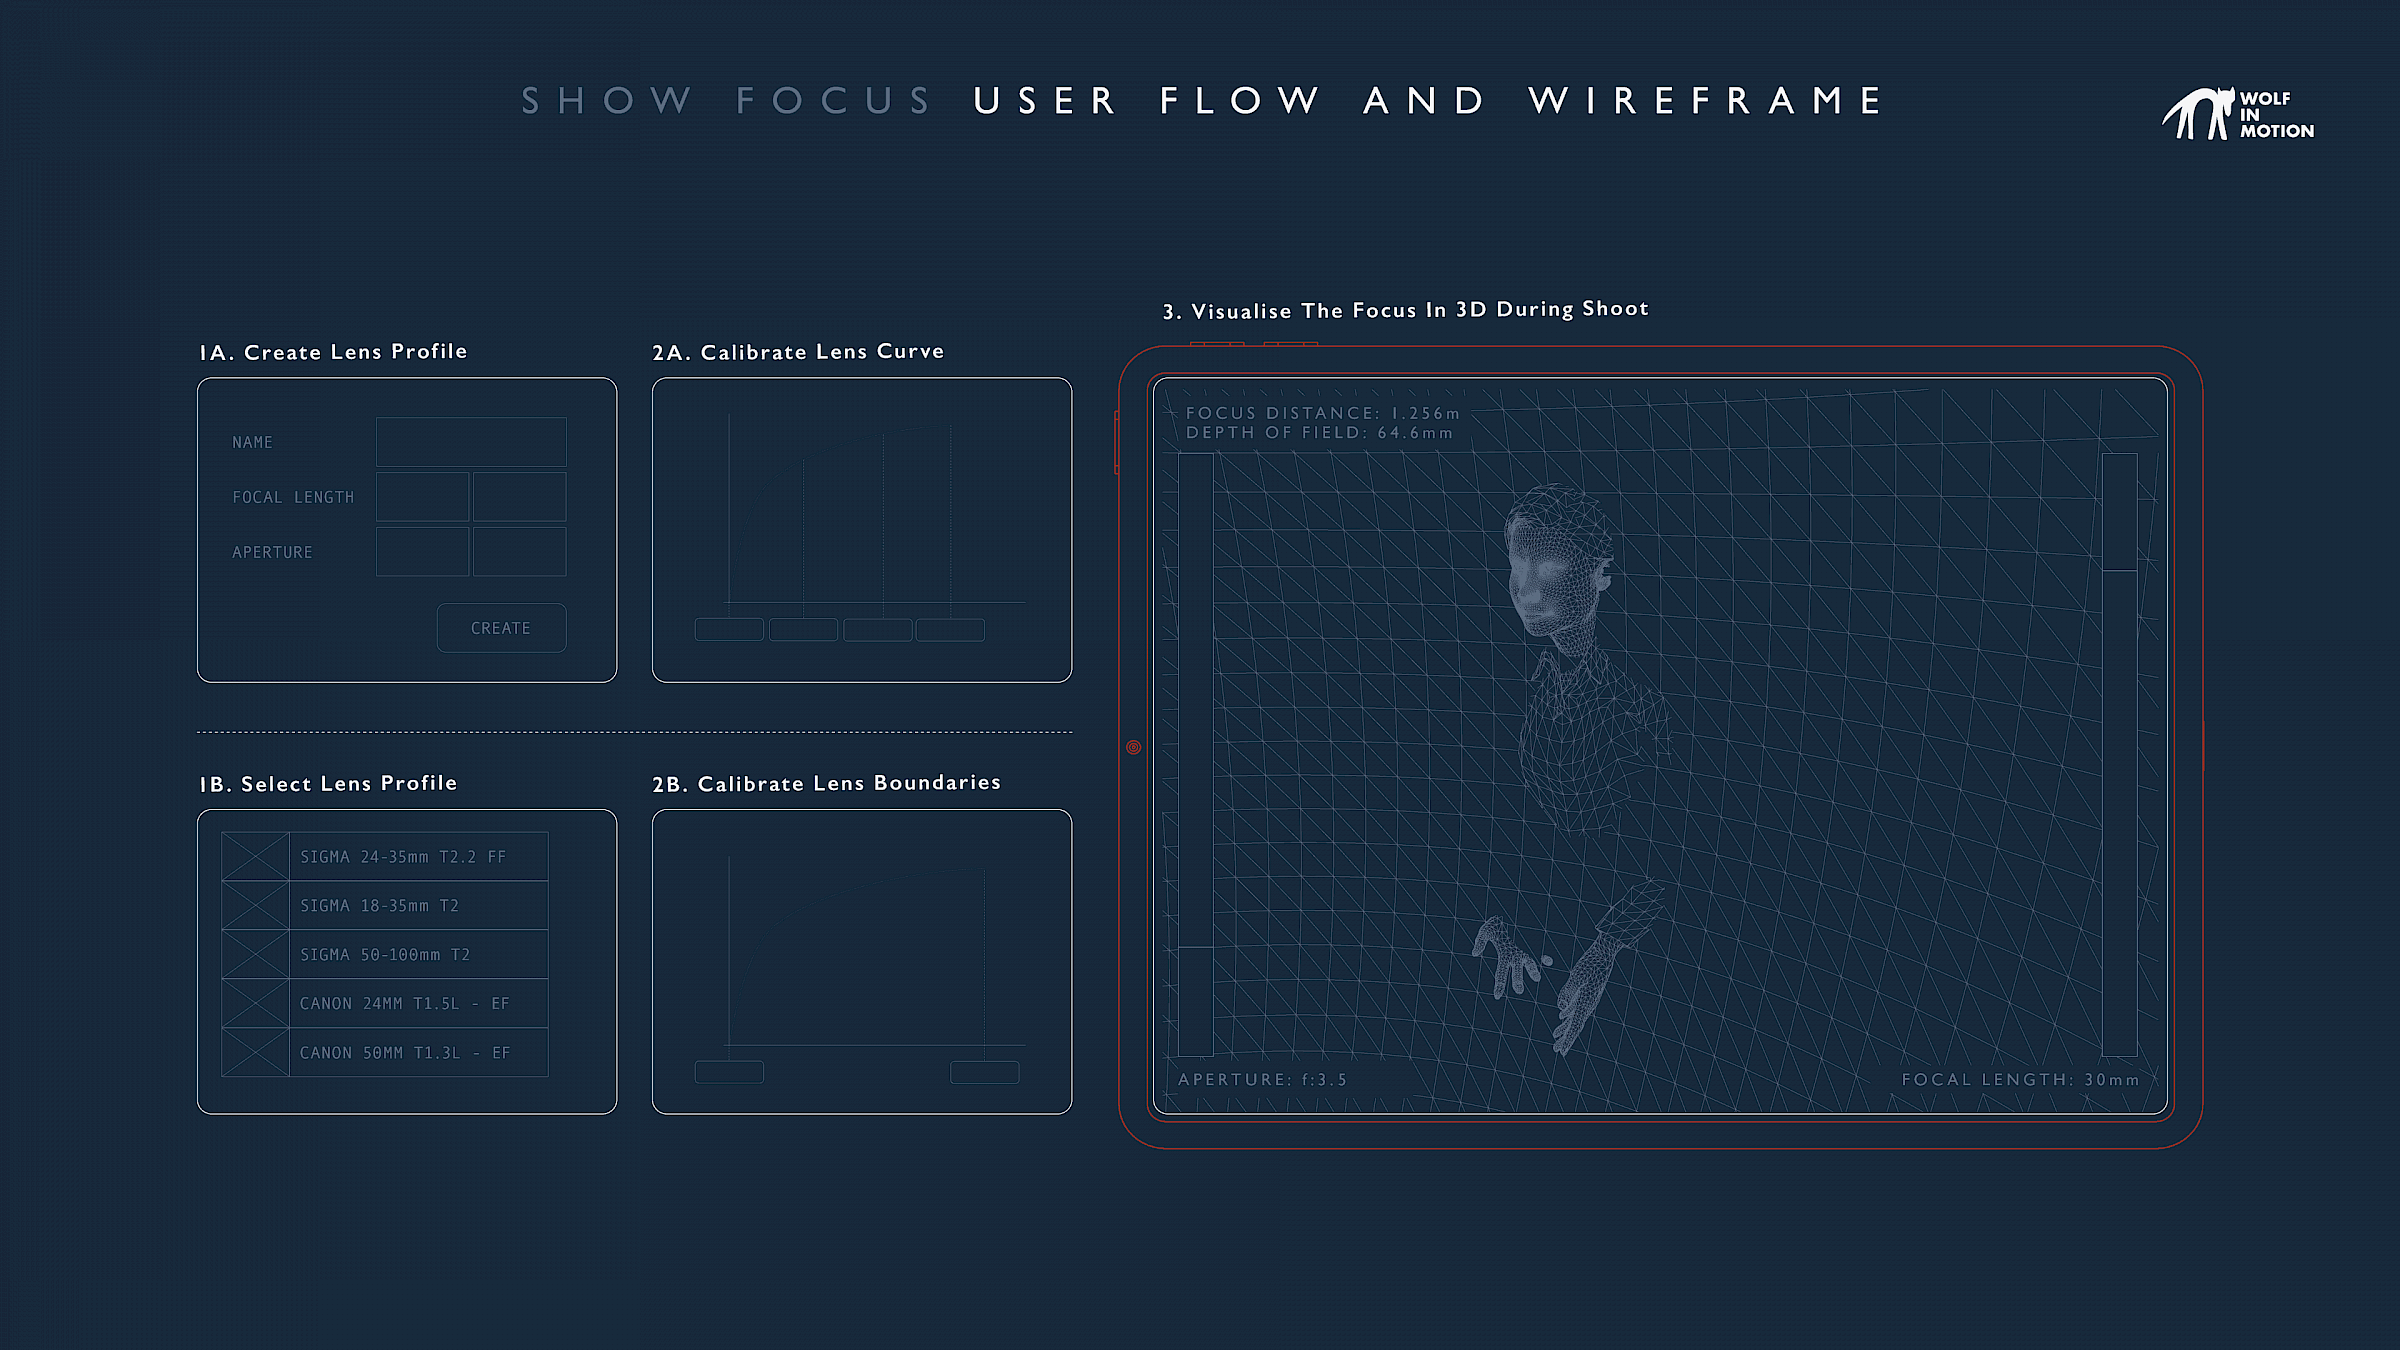 User flow and wireframe of the Show Focus iOS application